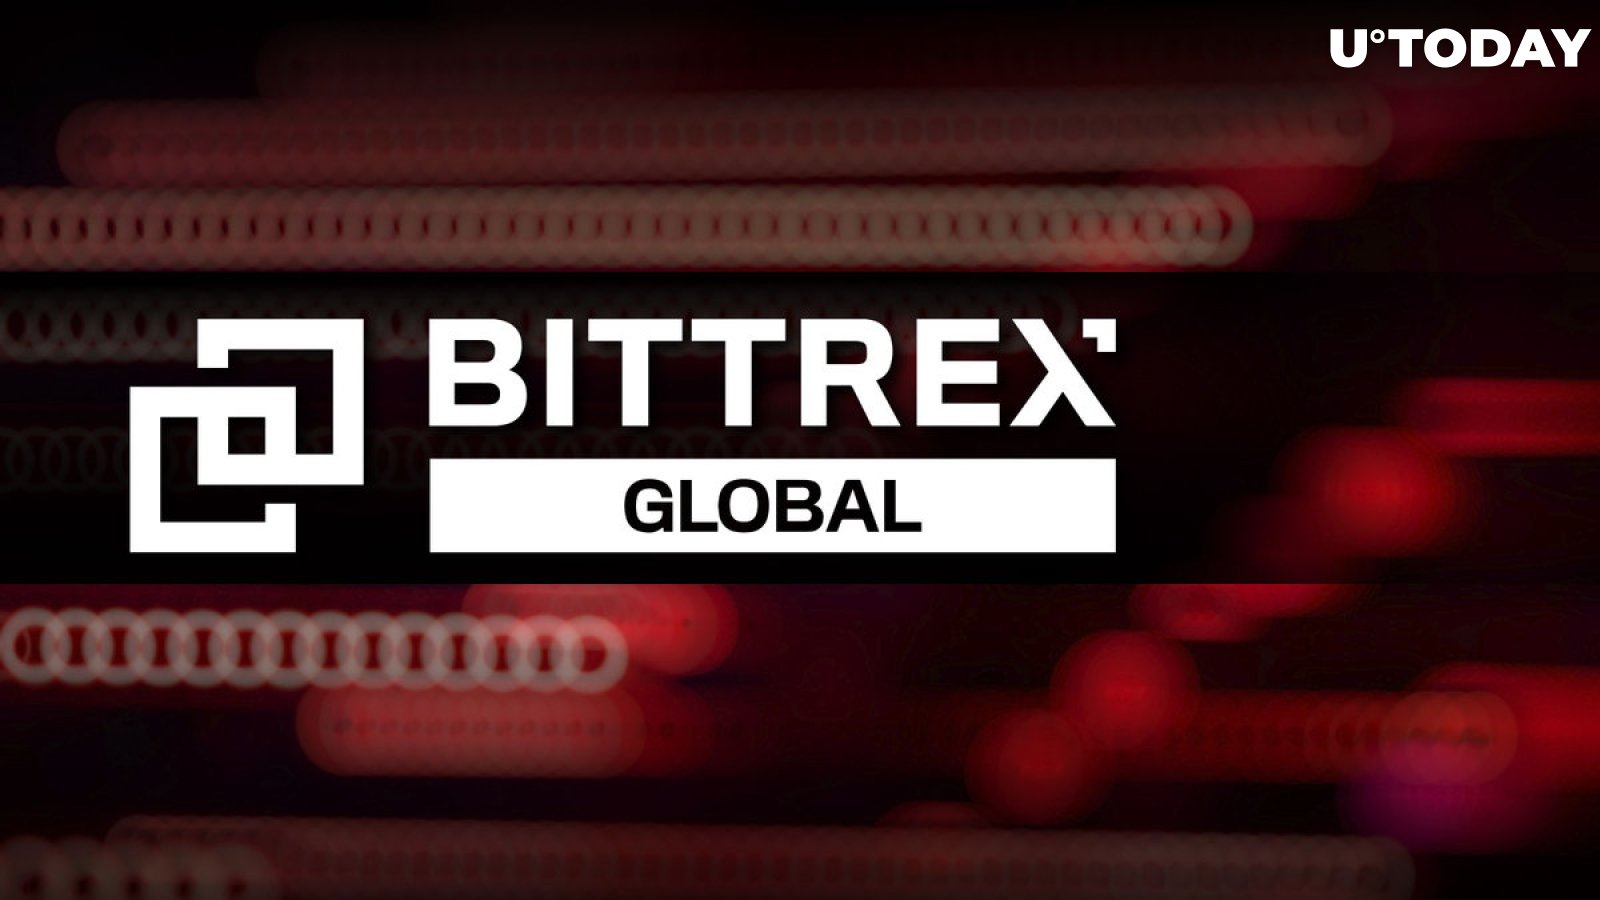 bittrex: Bittrex approved to borrow $7 million bankruptcy loan in bitcoin - The Economic Times